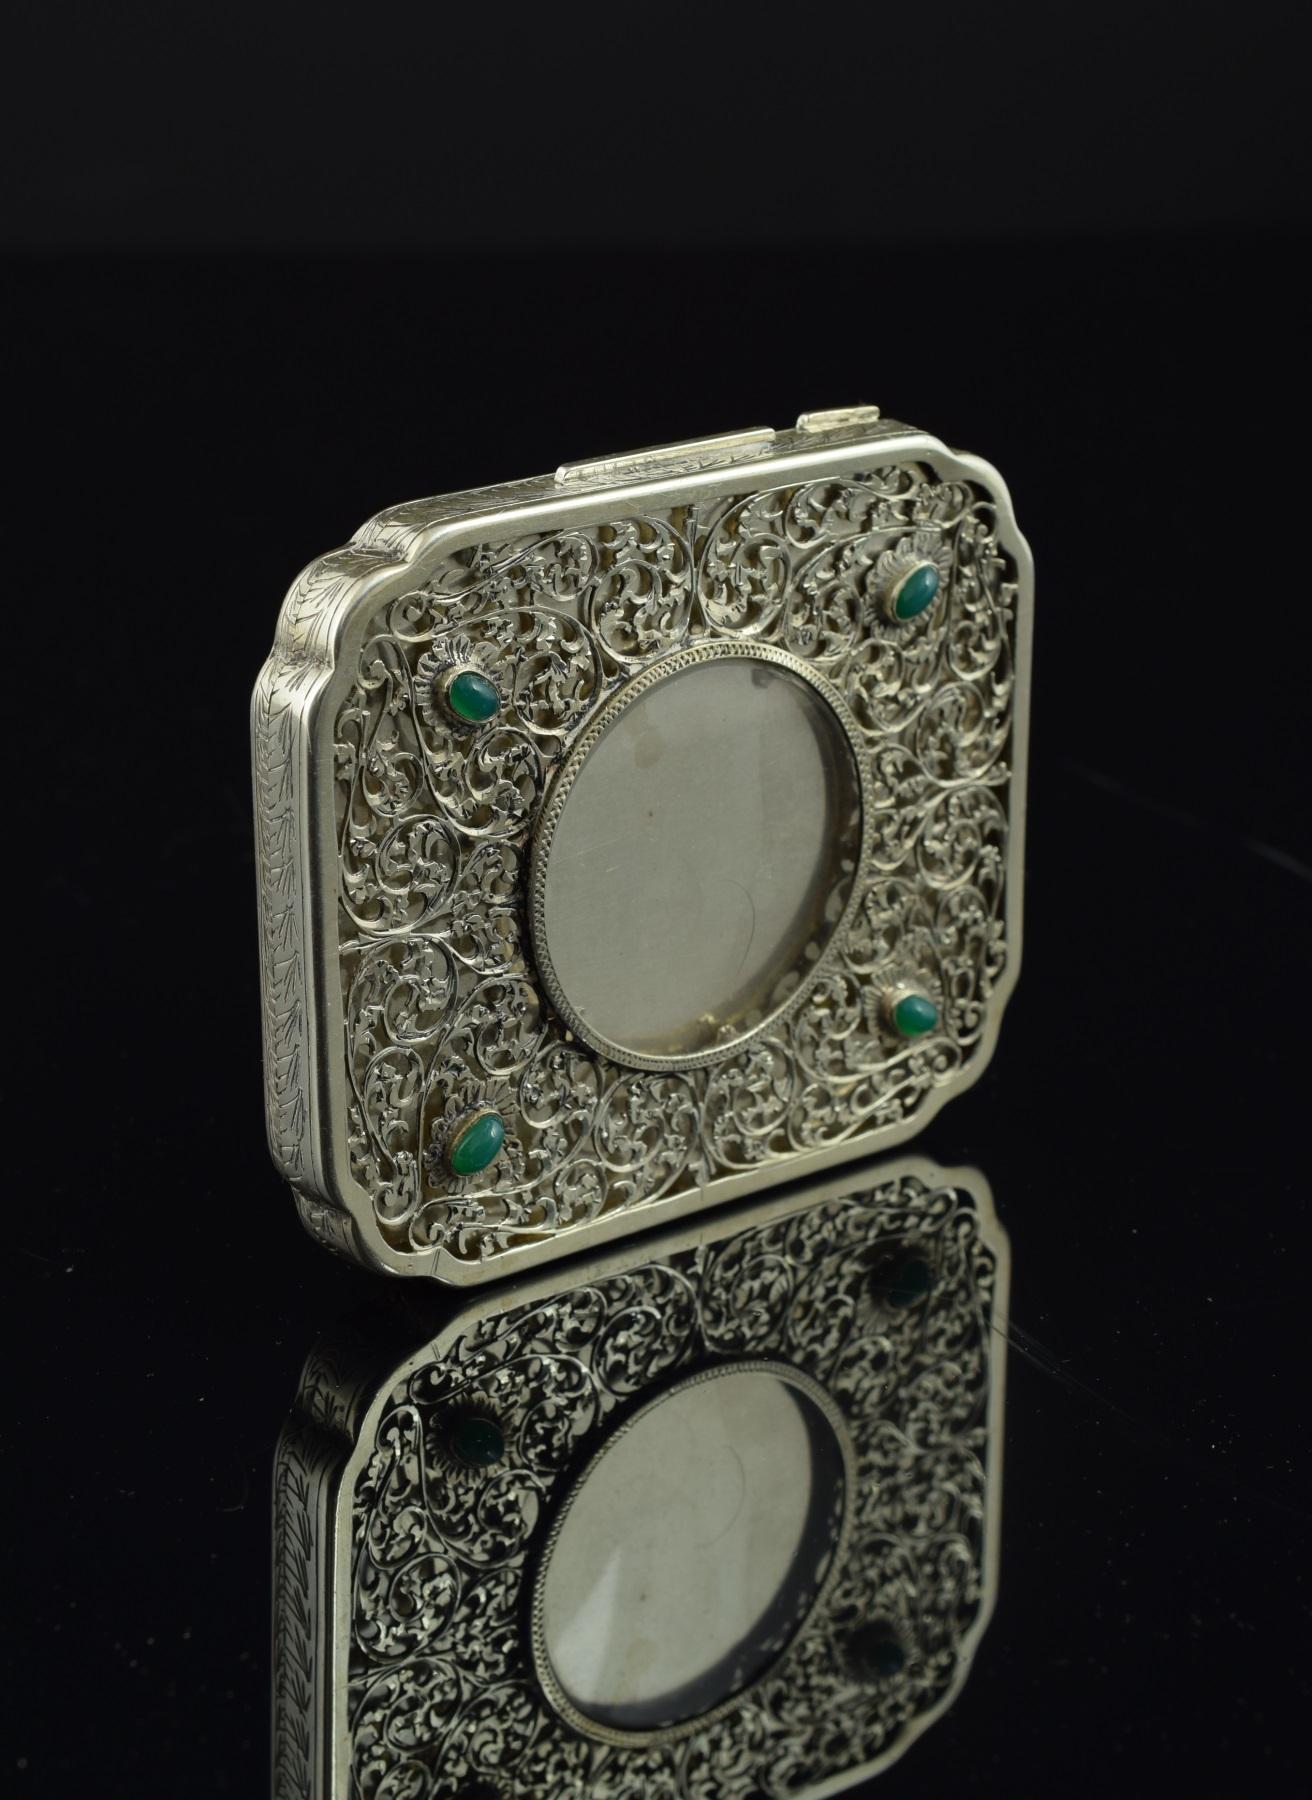 Rectangular silver box decorated with a delicate work of fine curved stems and leaves on the lid, arranged around a circular central space and with four elements flowered with green stones towards the corners. It emphasizes the symmetry of this